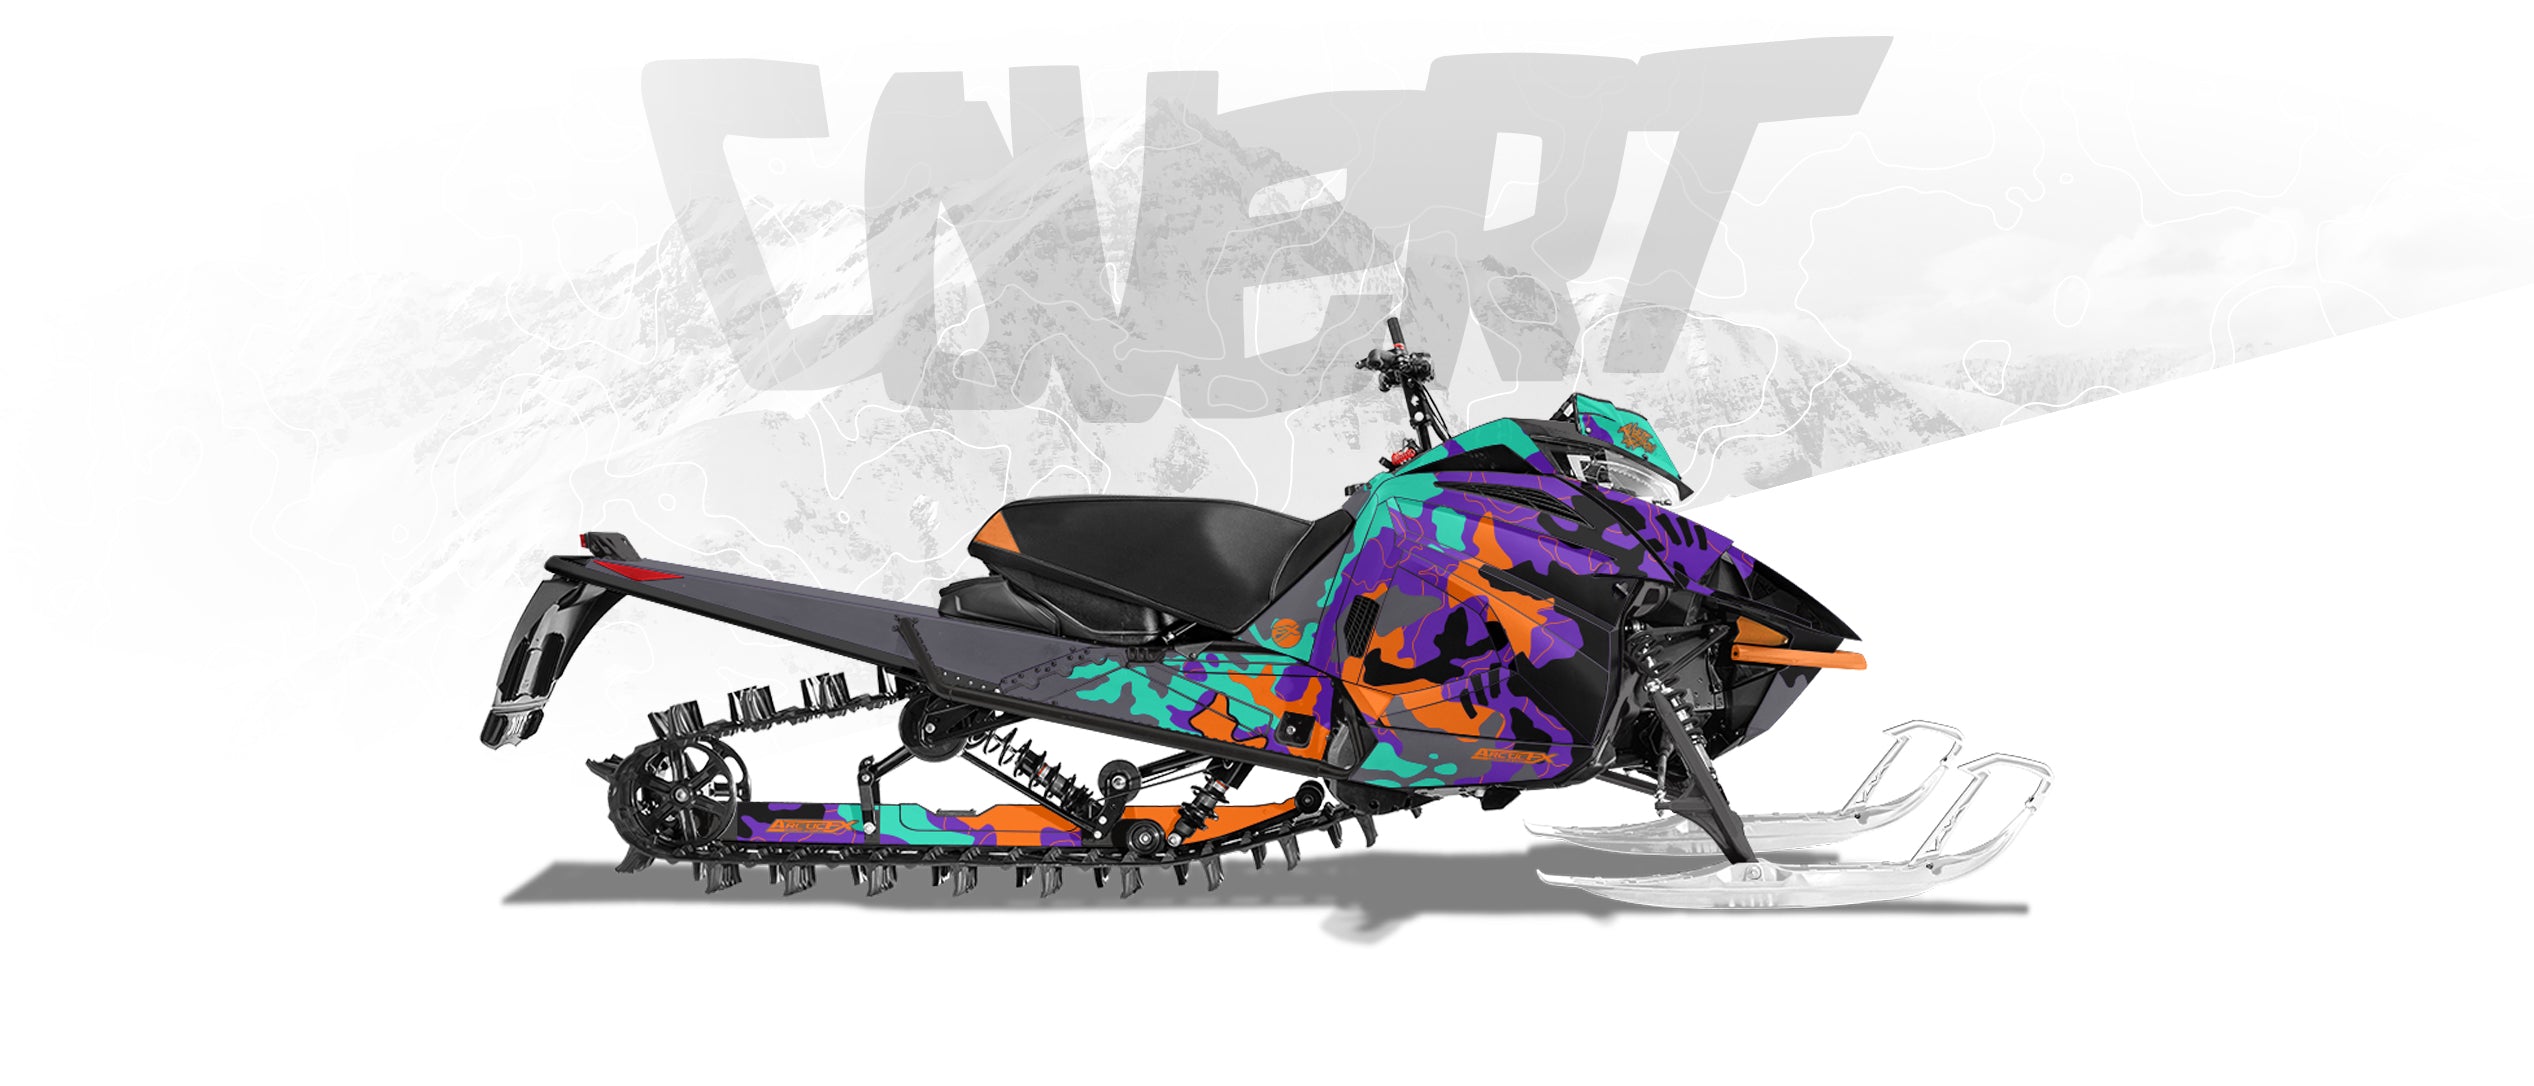 camo wrap on a arctic cat snowmobile in multiple colors